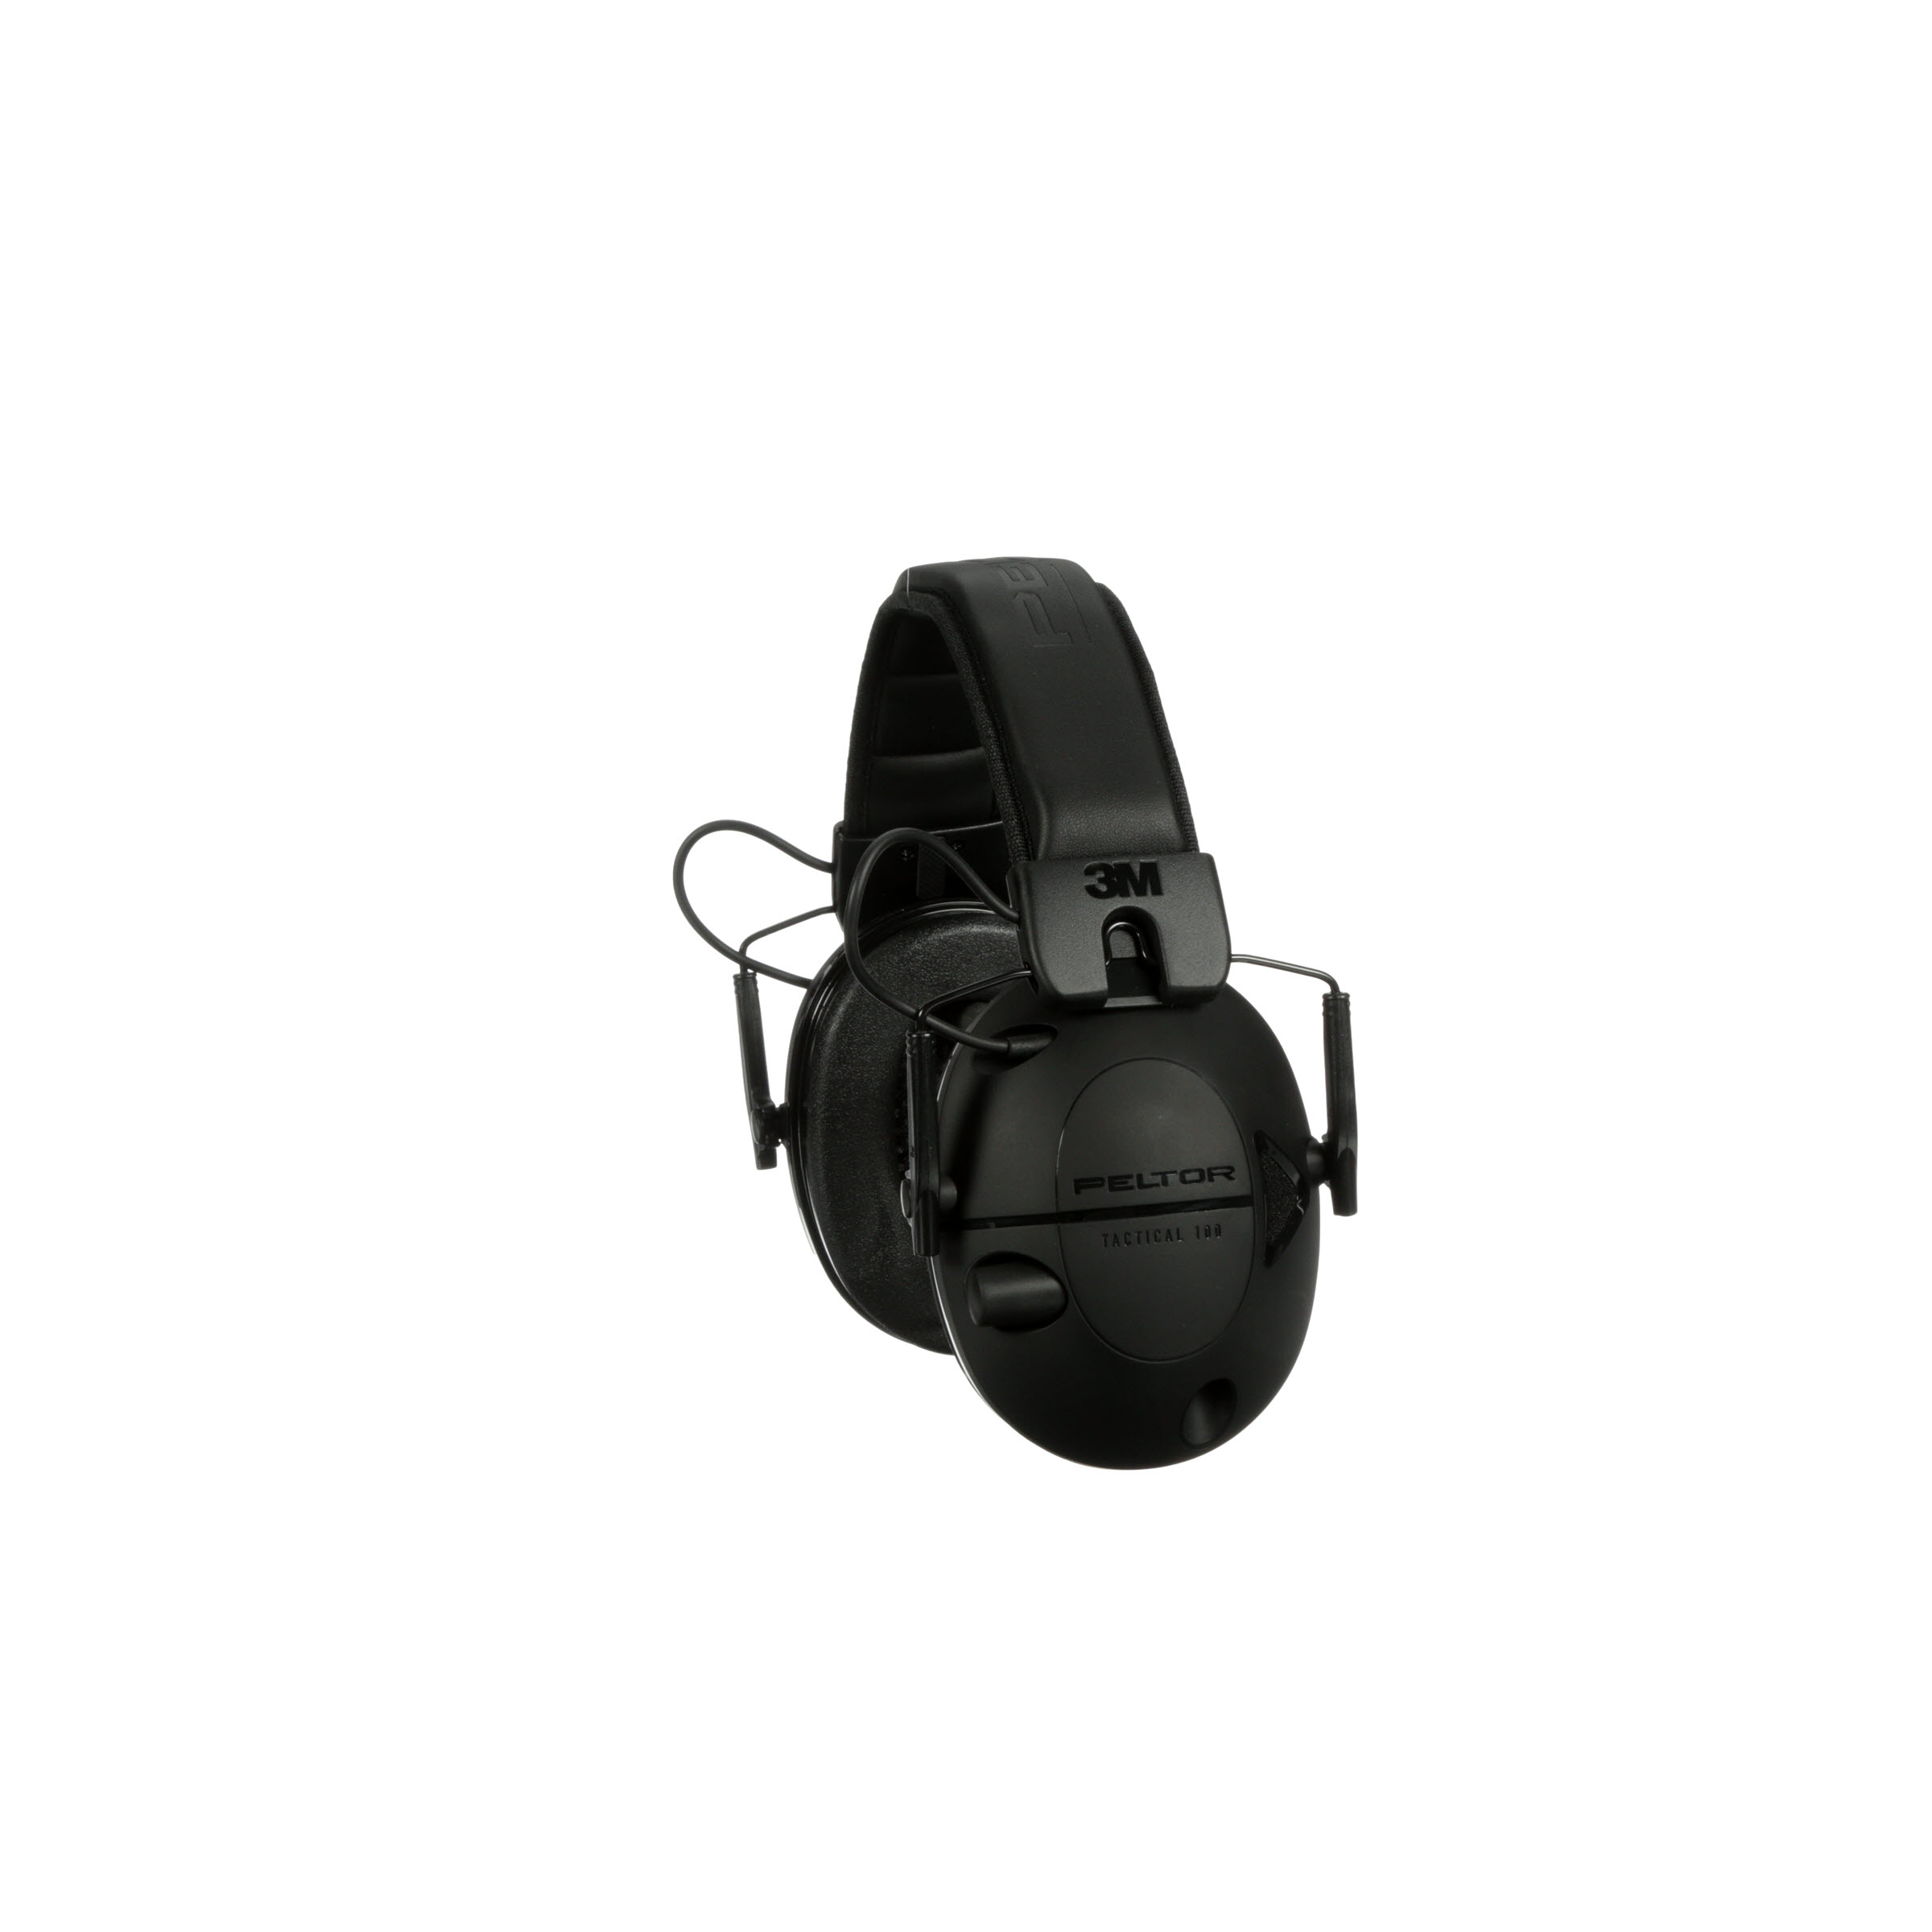 Peltor Sporttac Electronic Ear Defenders Shooting sportac Hearing  Protection 3M 8438567480089